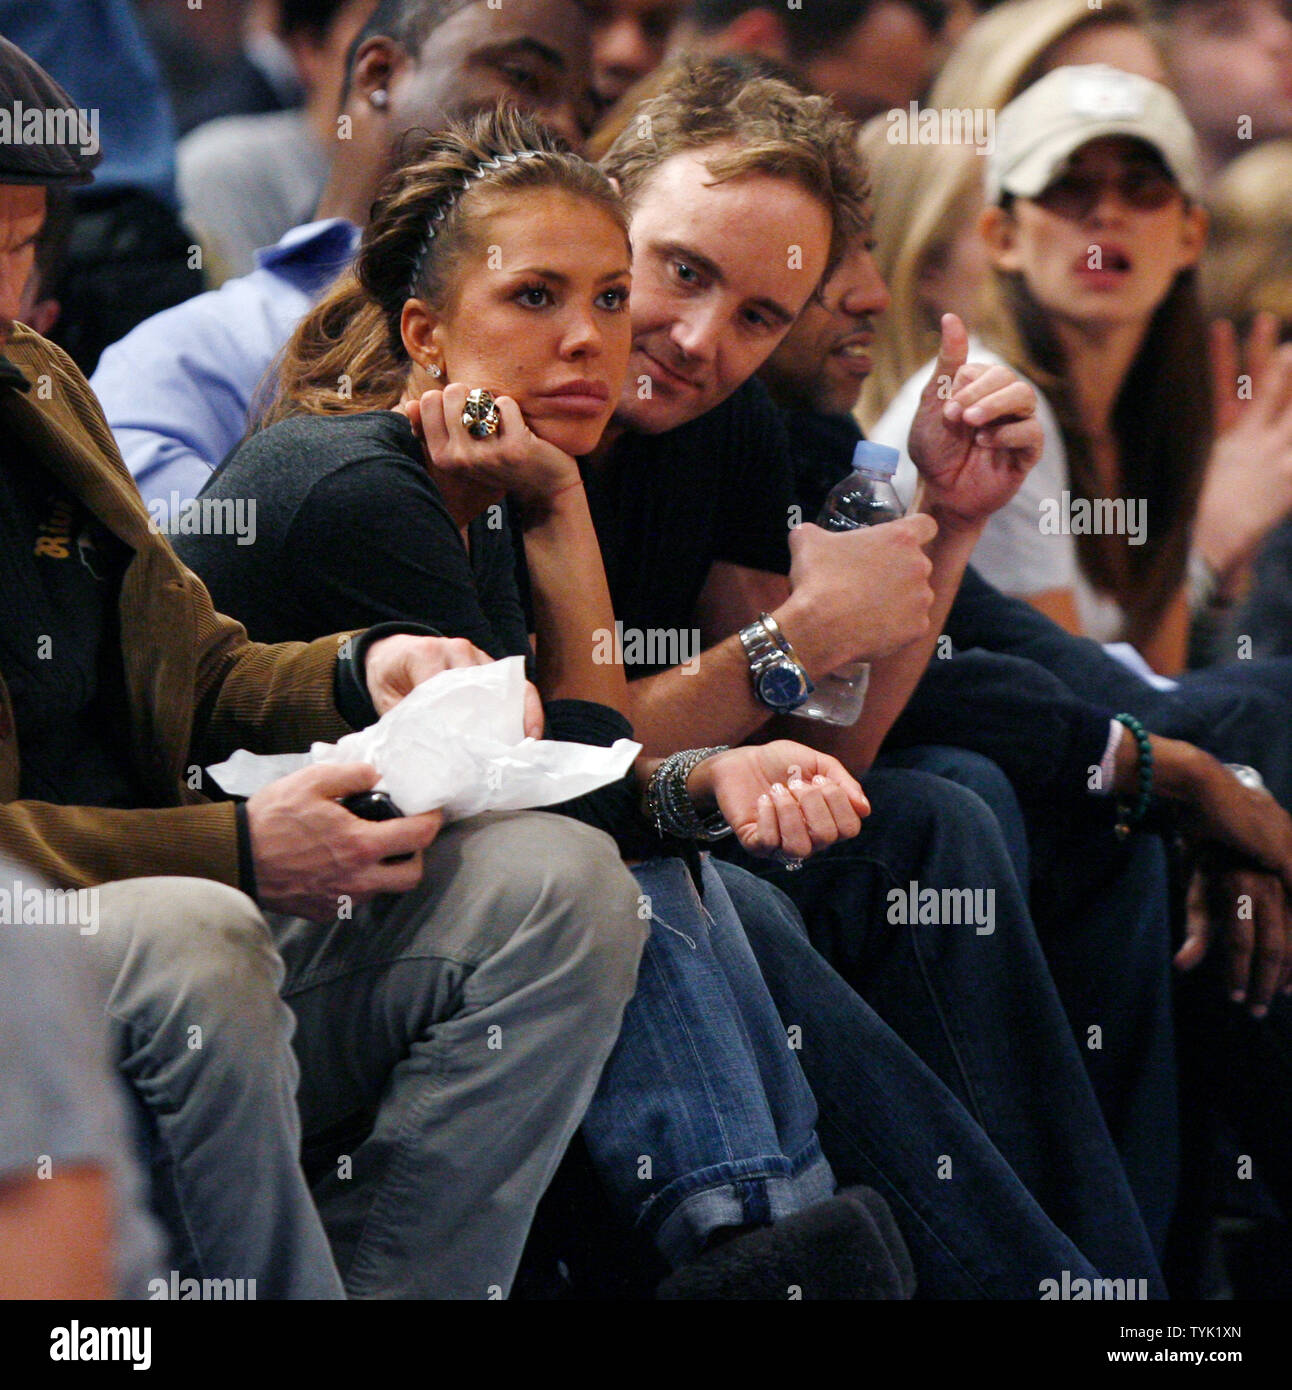 Nikki Cox and Jay Mohr (R) watch the New Jersey Nets play the New York Knicks at Madison Square Garden in New York City on March 18, 2009. The Nets defeated the Knicks 115-89.    (UPI Photo/John Angelillo) Stock Photo